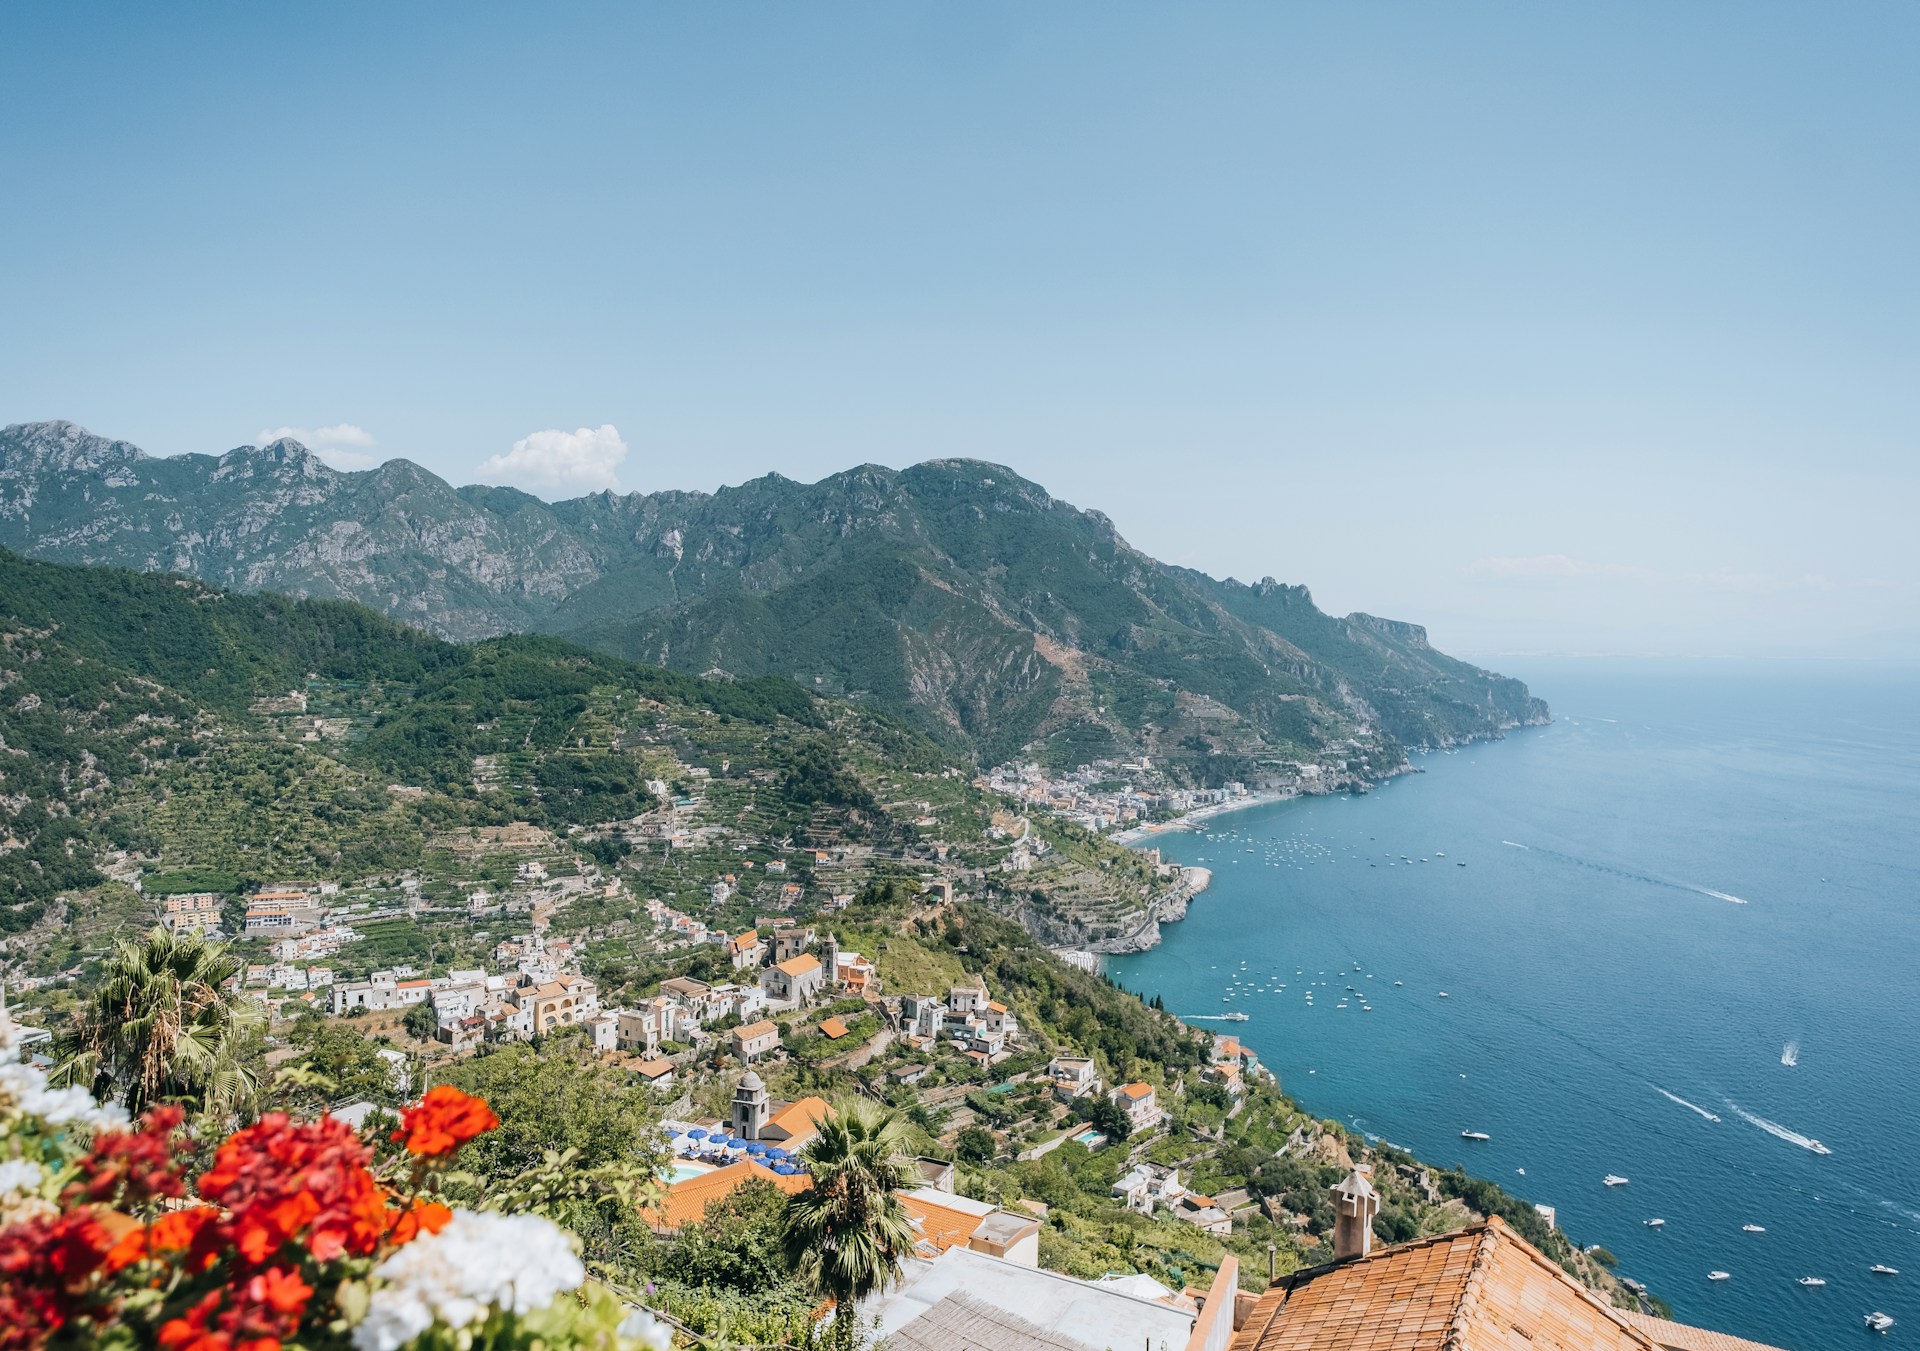 Photograph looking down on the town of Ravello and the Amalfi Coastline, dotted with boats